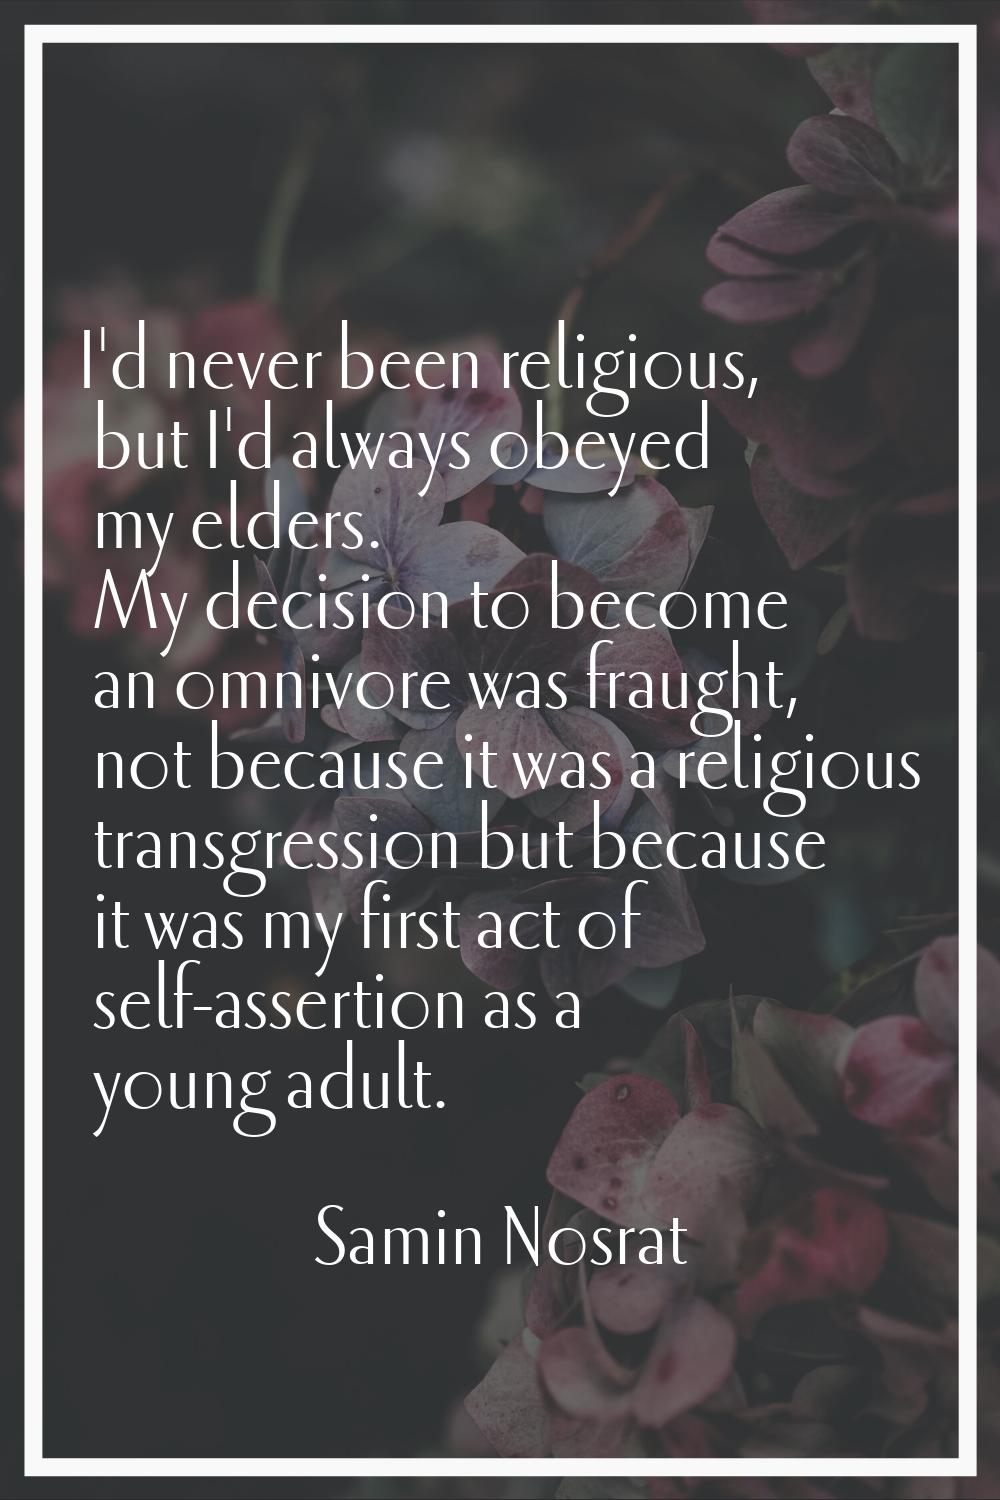 I'd never been religious, but I'd always obeyed my elders. My decision to become an omnivore was fr